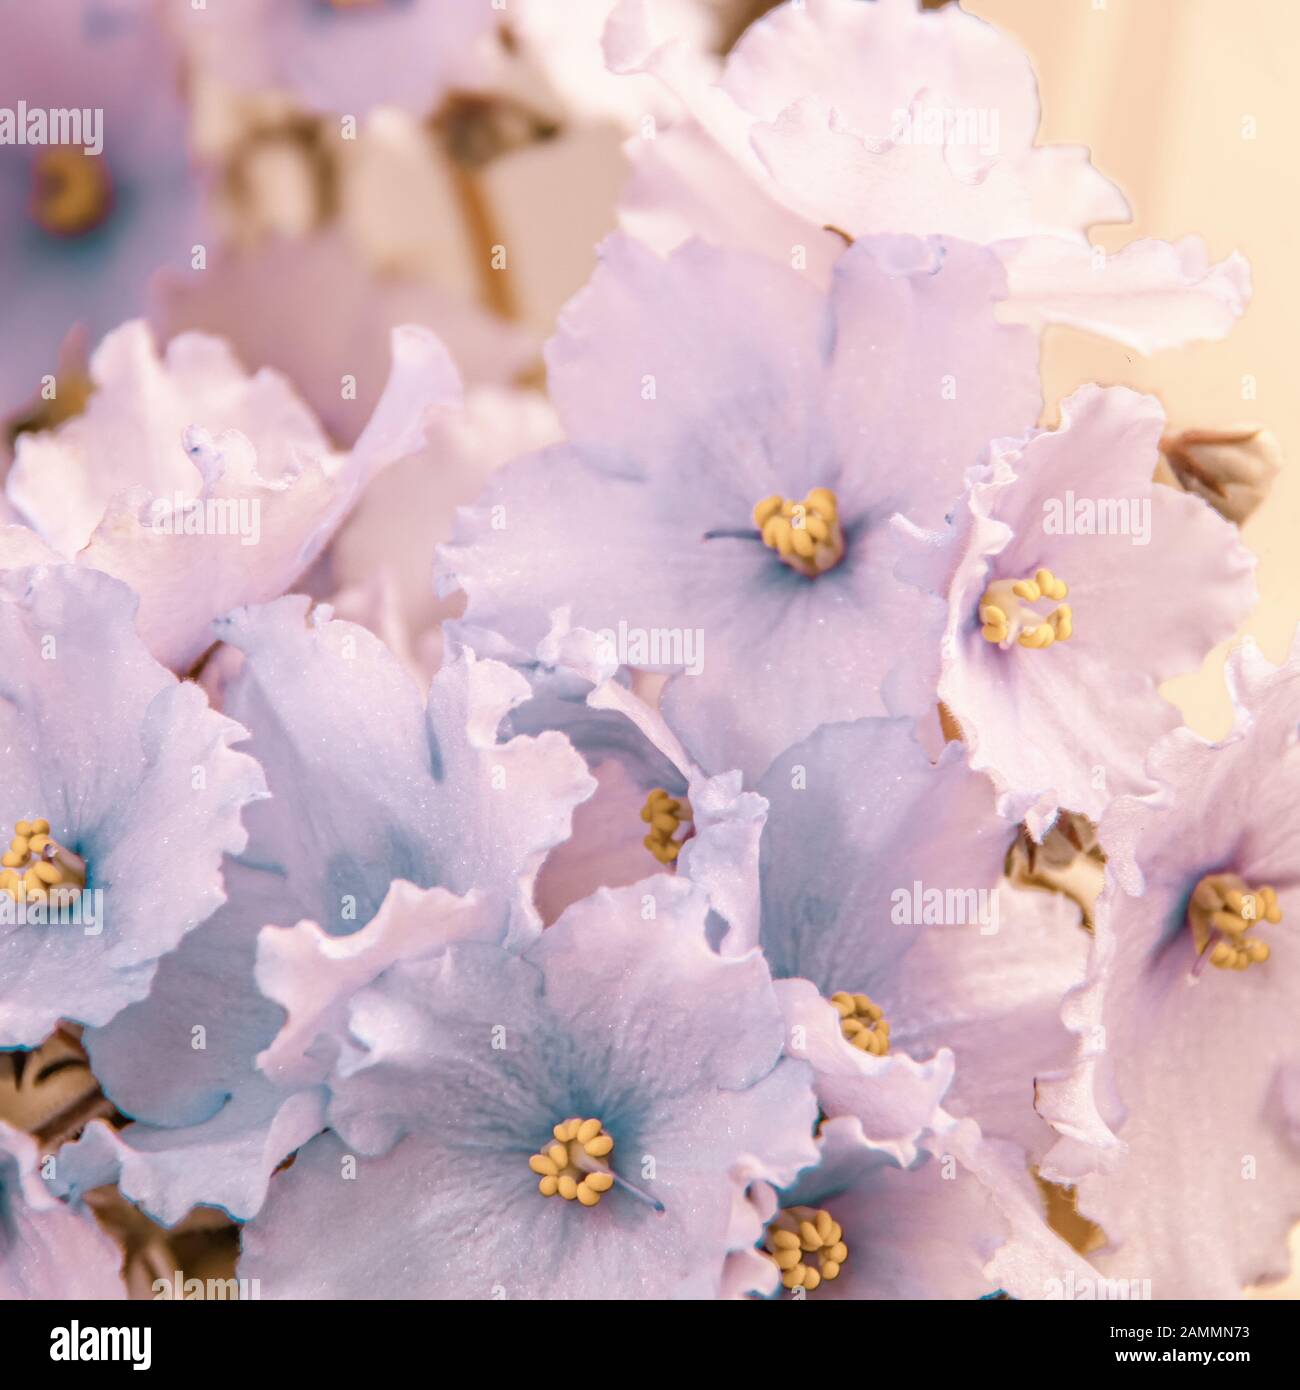 Floral background of beautiful pale blue flowers of African violet or Saintpaulia close-up Stock Photo